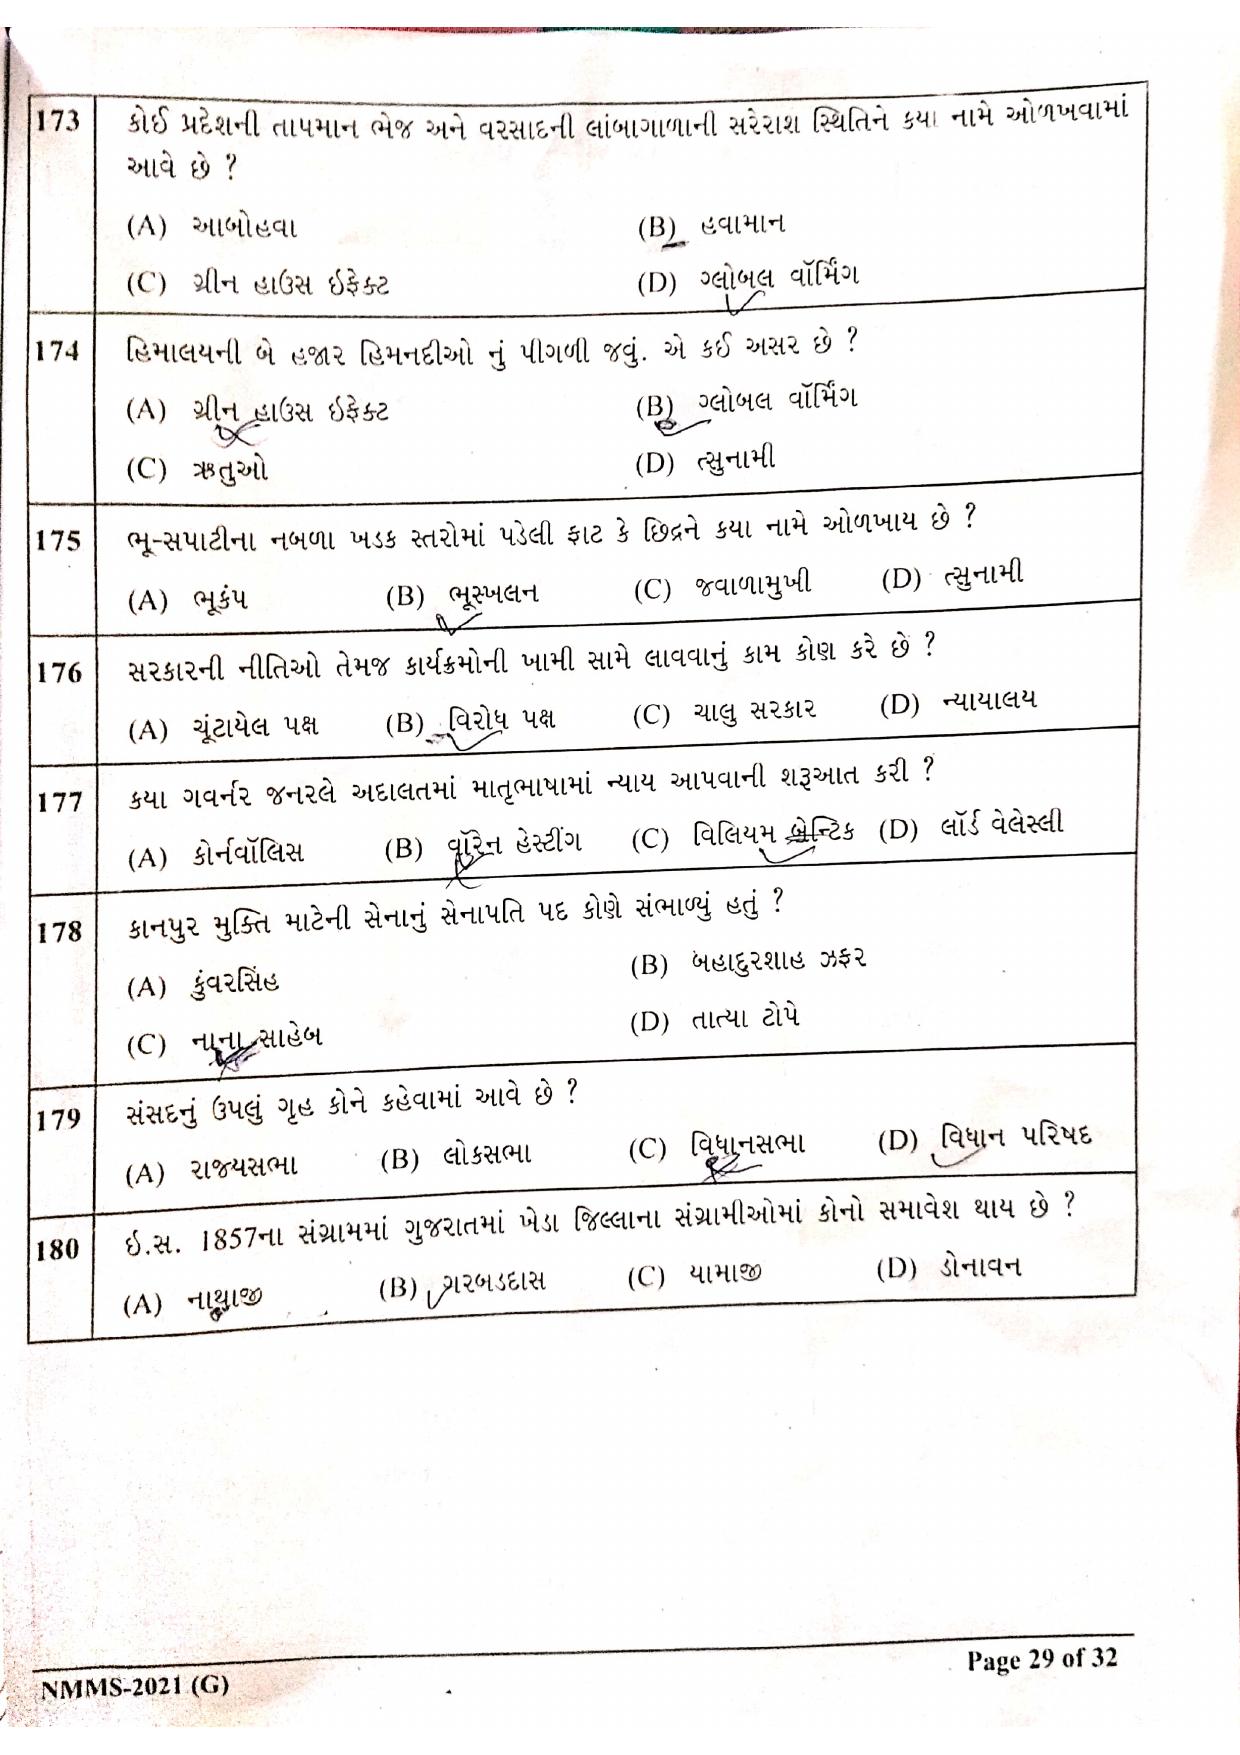 Gujarat NMMS 2021 Question Paper - Page 19